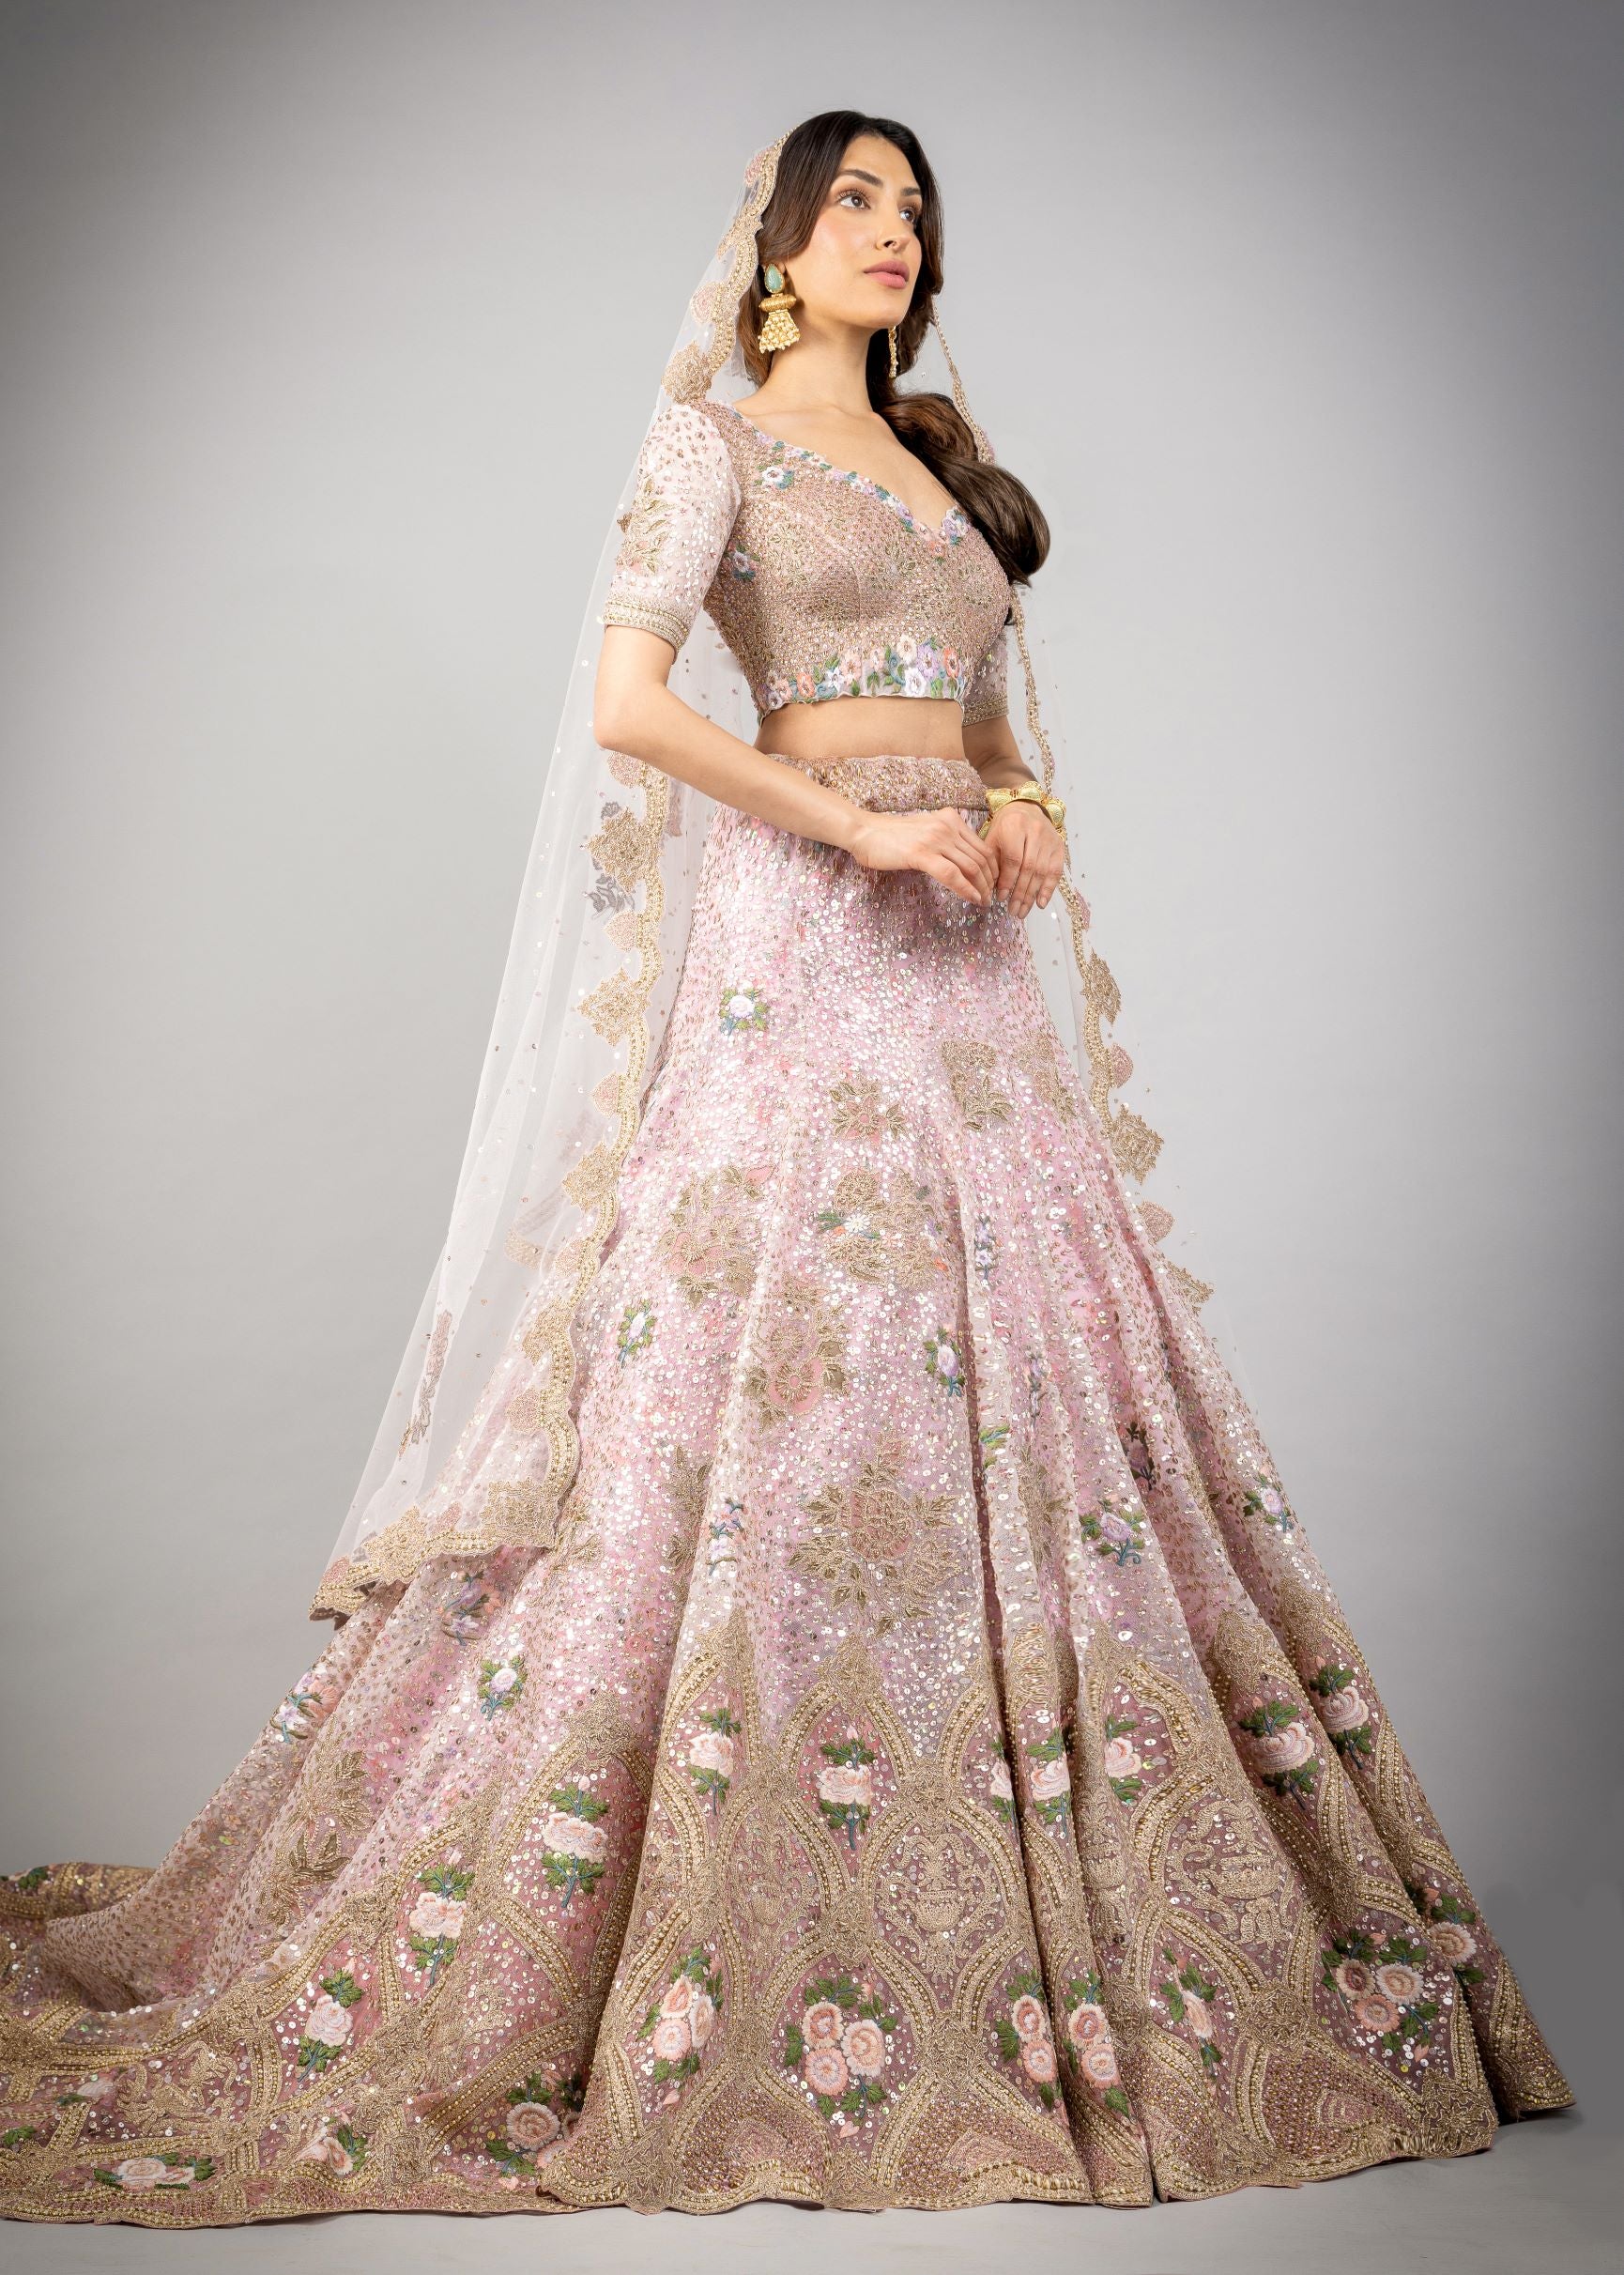 8 Stunning Gold Indian Wedding Dresses For The Bride And Groom